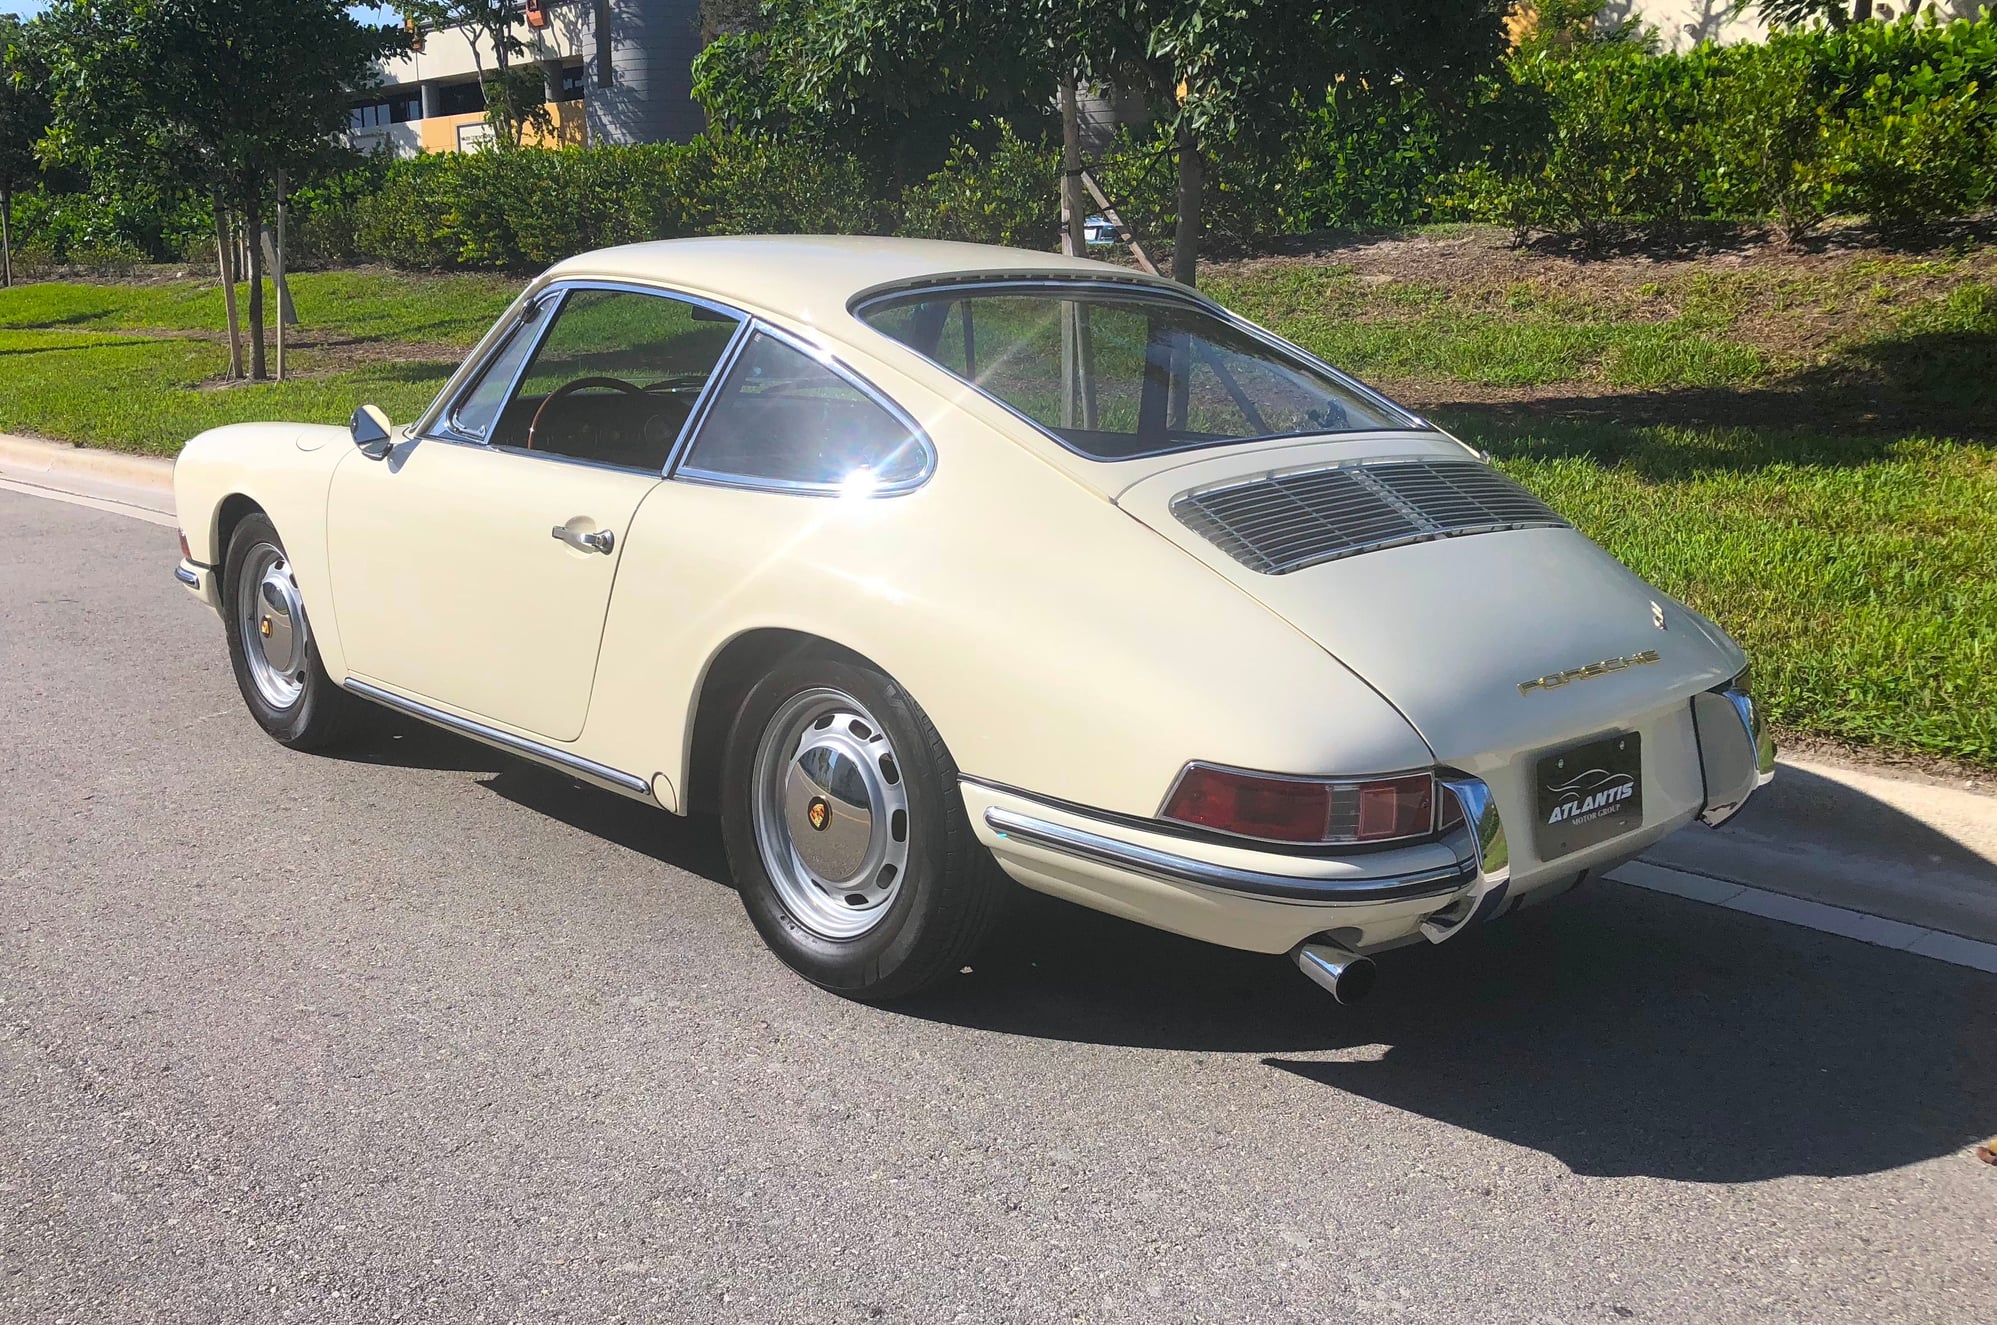 1966 Porsche 911 - 1966 Porsche 911 - All numbers matching - Restored - Used - VIN 00000000000303545 - 19,000 Miles - 2 cyl - 2WD - Automatic - Coupe - White - Deerfield Beach, FL 33441, United States